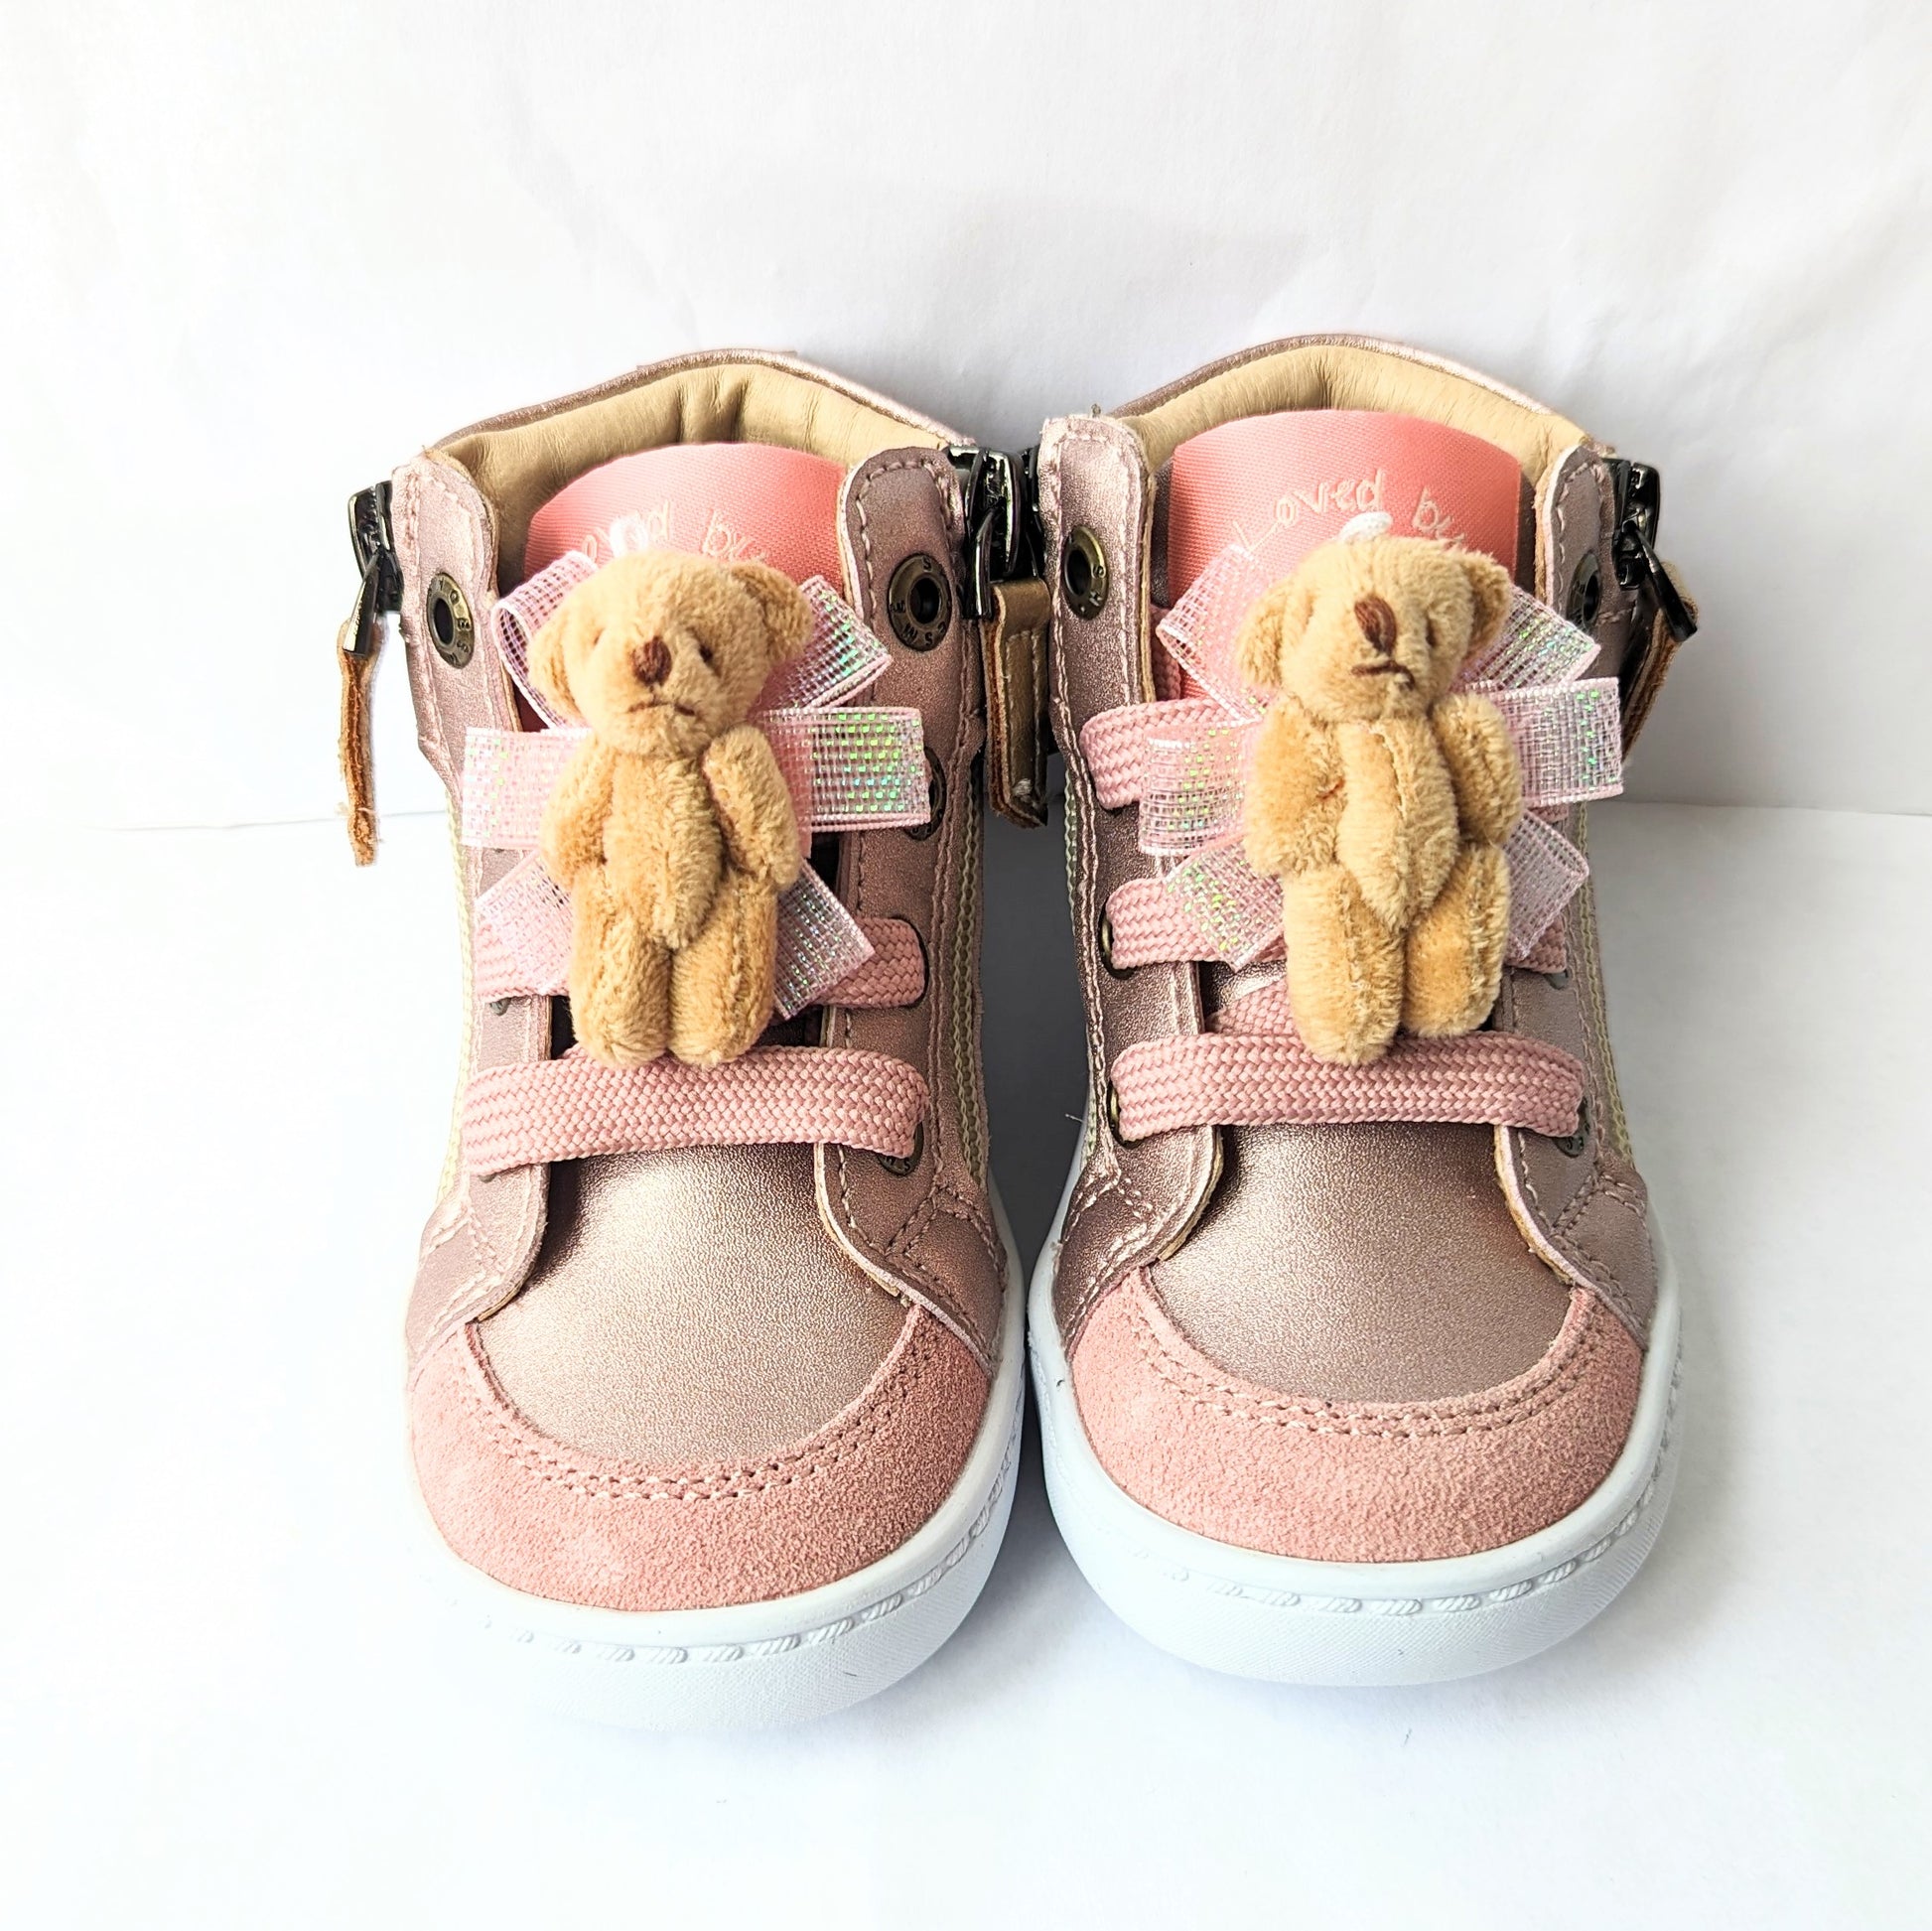 A pair of girls hi-top boots by Shoesme, style FL23W008-B, in rose gold floral leather and suede with detachable teddy bears and lace and zip fastening. Front view of pair.